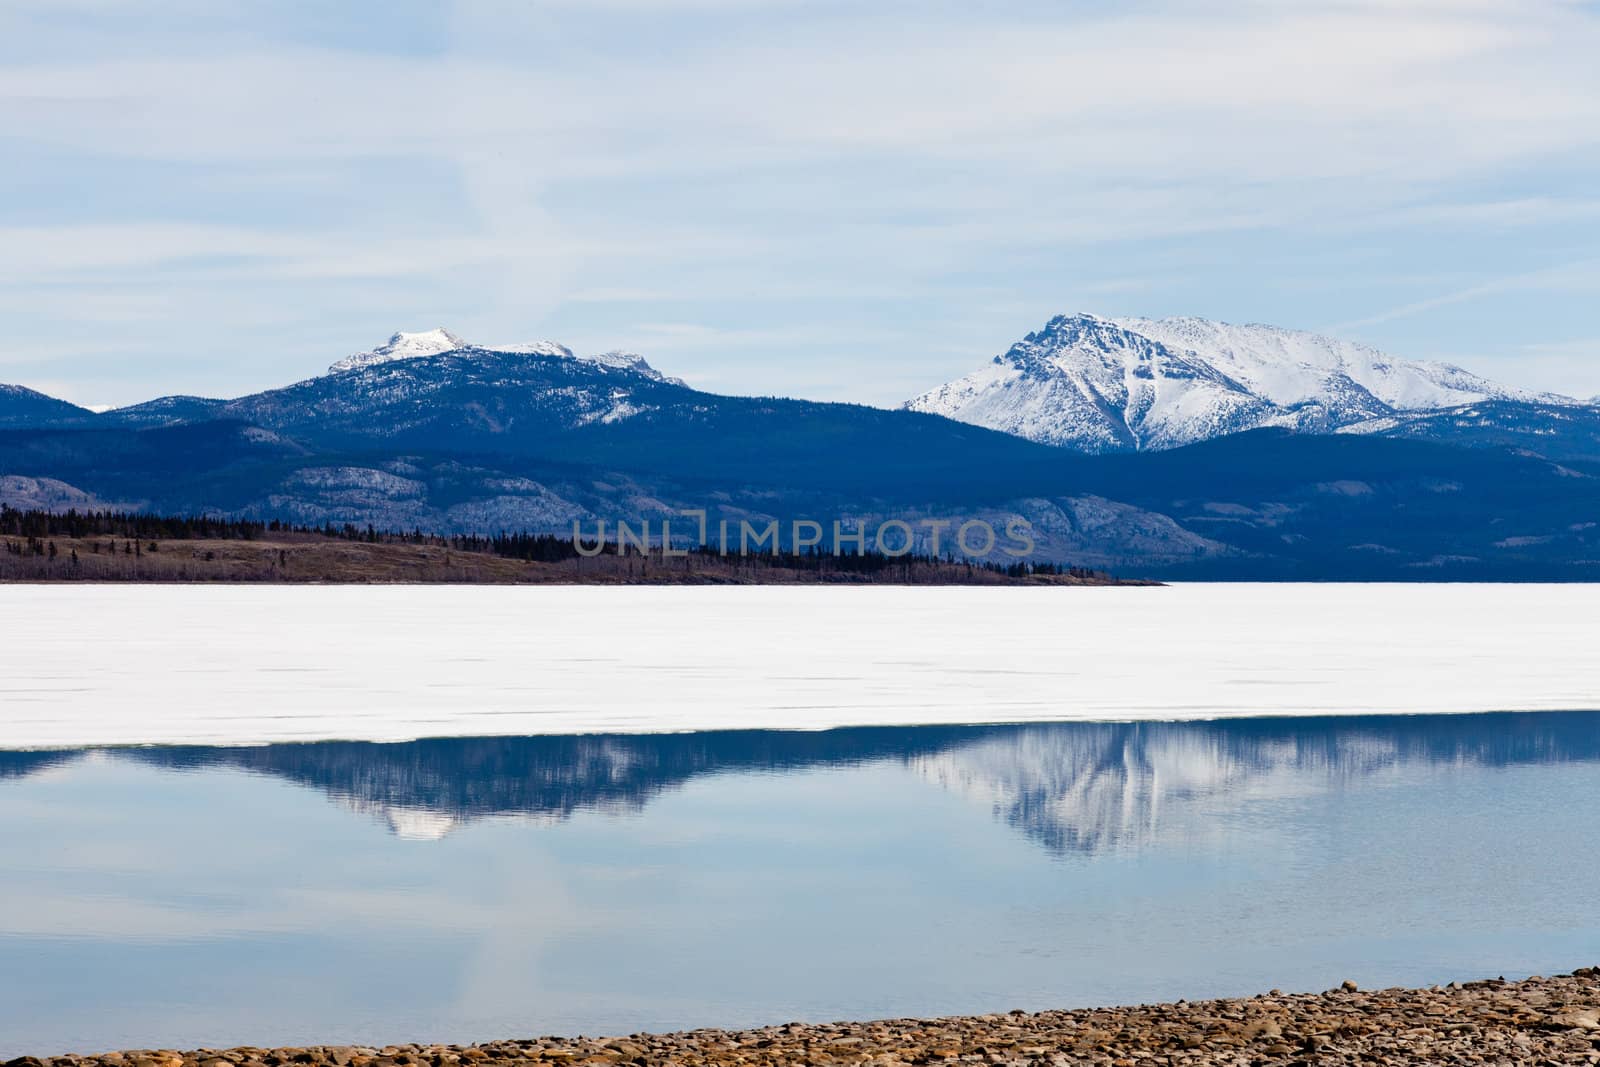 Snowy Mountains mirrored on Lake Laberge, Yukon, Canada by PiLens